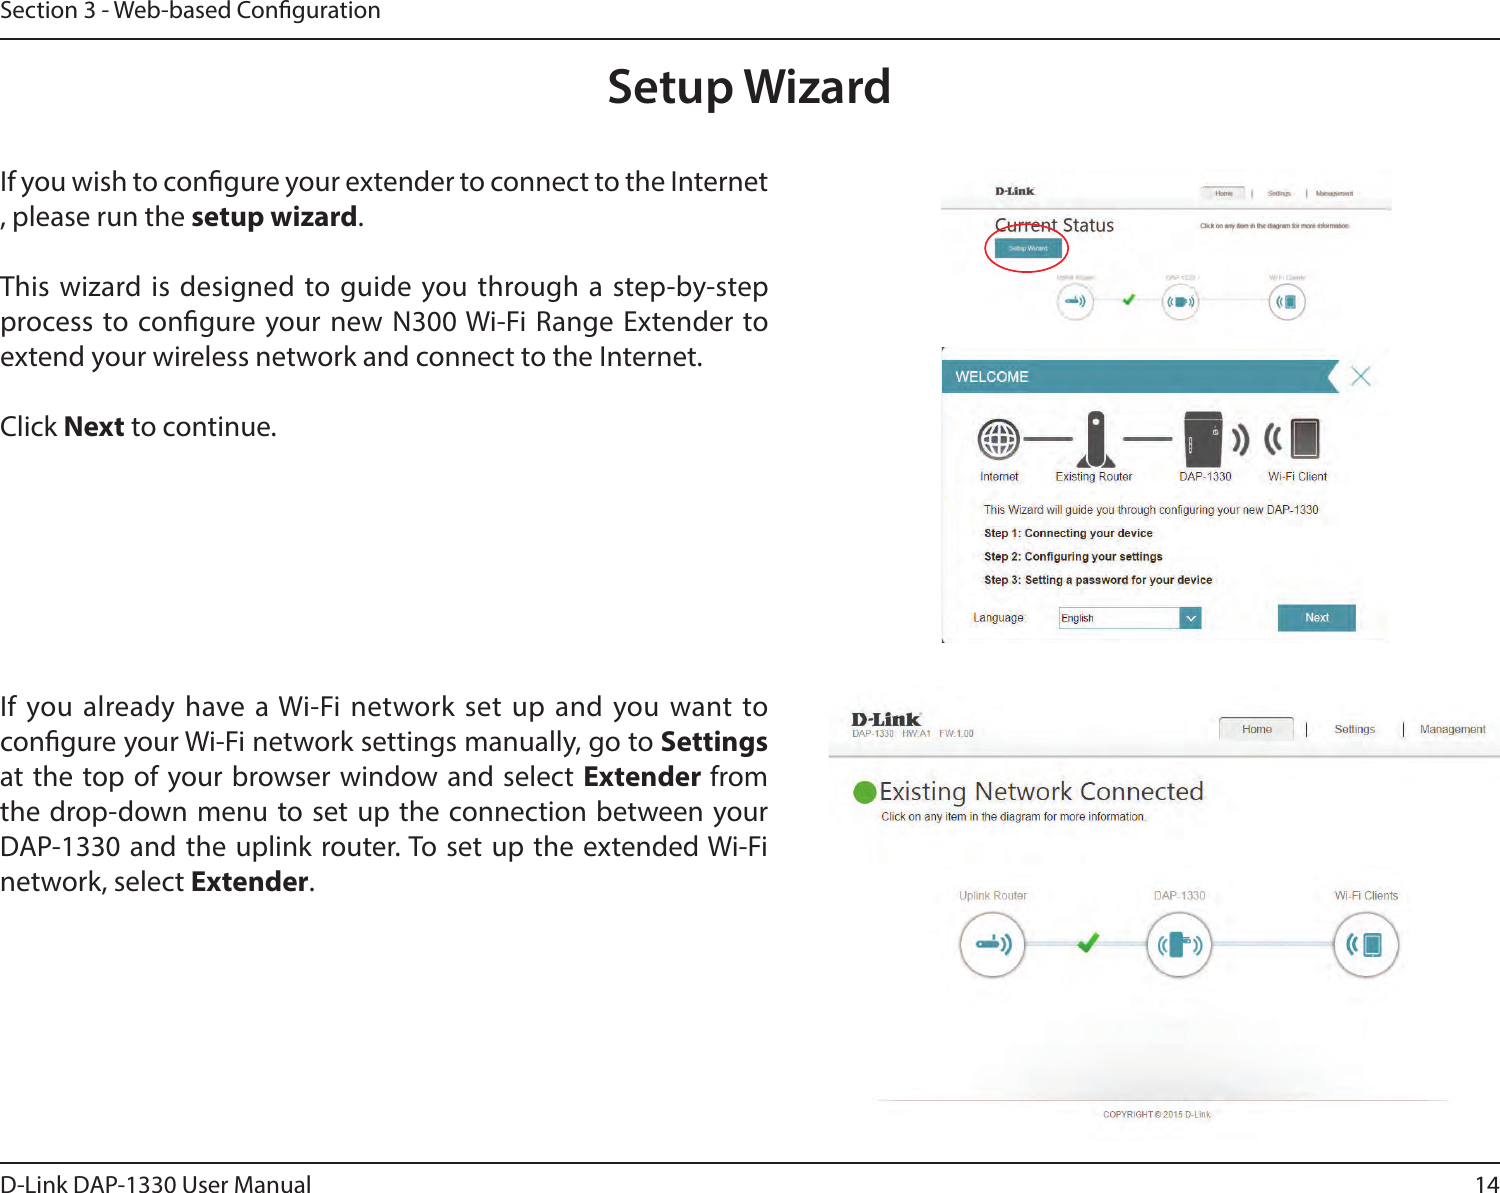 14D-Link DAP-1330 User ManualSection 3 - Web-based CongurationSetup WizardIf you wish to congure your extender to connect to the Internet, please run the setup wizard.This wizard is designed to guide you through a step-by-step process to congure your new N300 Wi-Fi Range Extender to extend your wireless network and connect to the Internet.Click Next to continue. If you already have a Wi-Fi network set up and you want to congure your Wi-Fi network settings manually, go to Settings  at the top of your browser window and select Extender from the drop-down menu to set up the connection between your DAP-1330 and the uplink router. To set up the extended Wi-Fi network, select Extender.